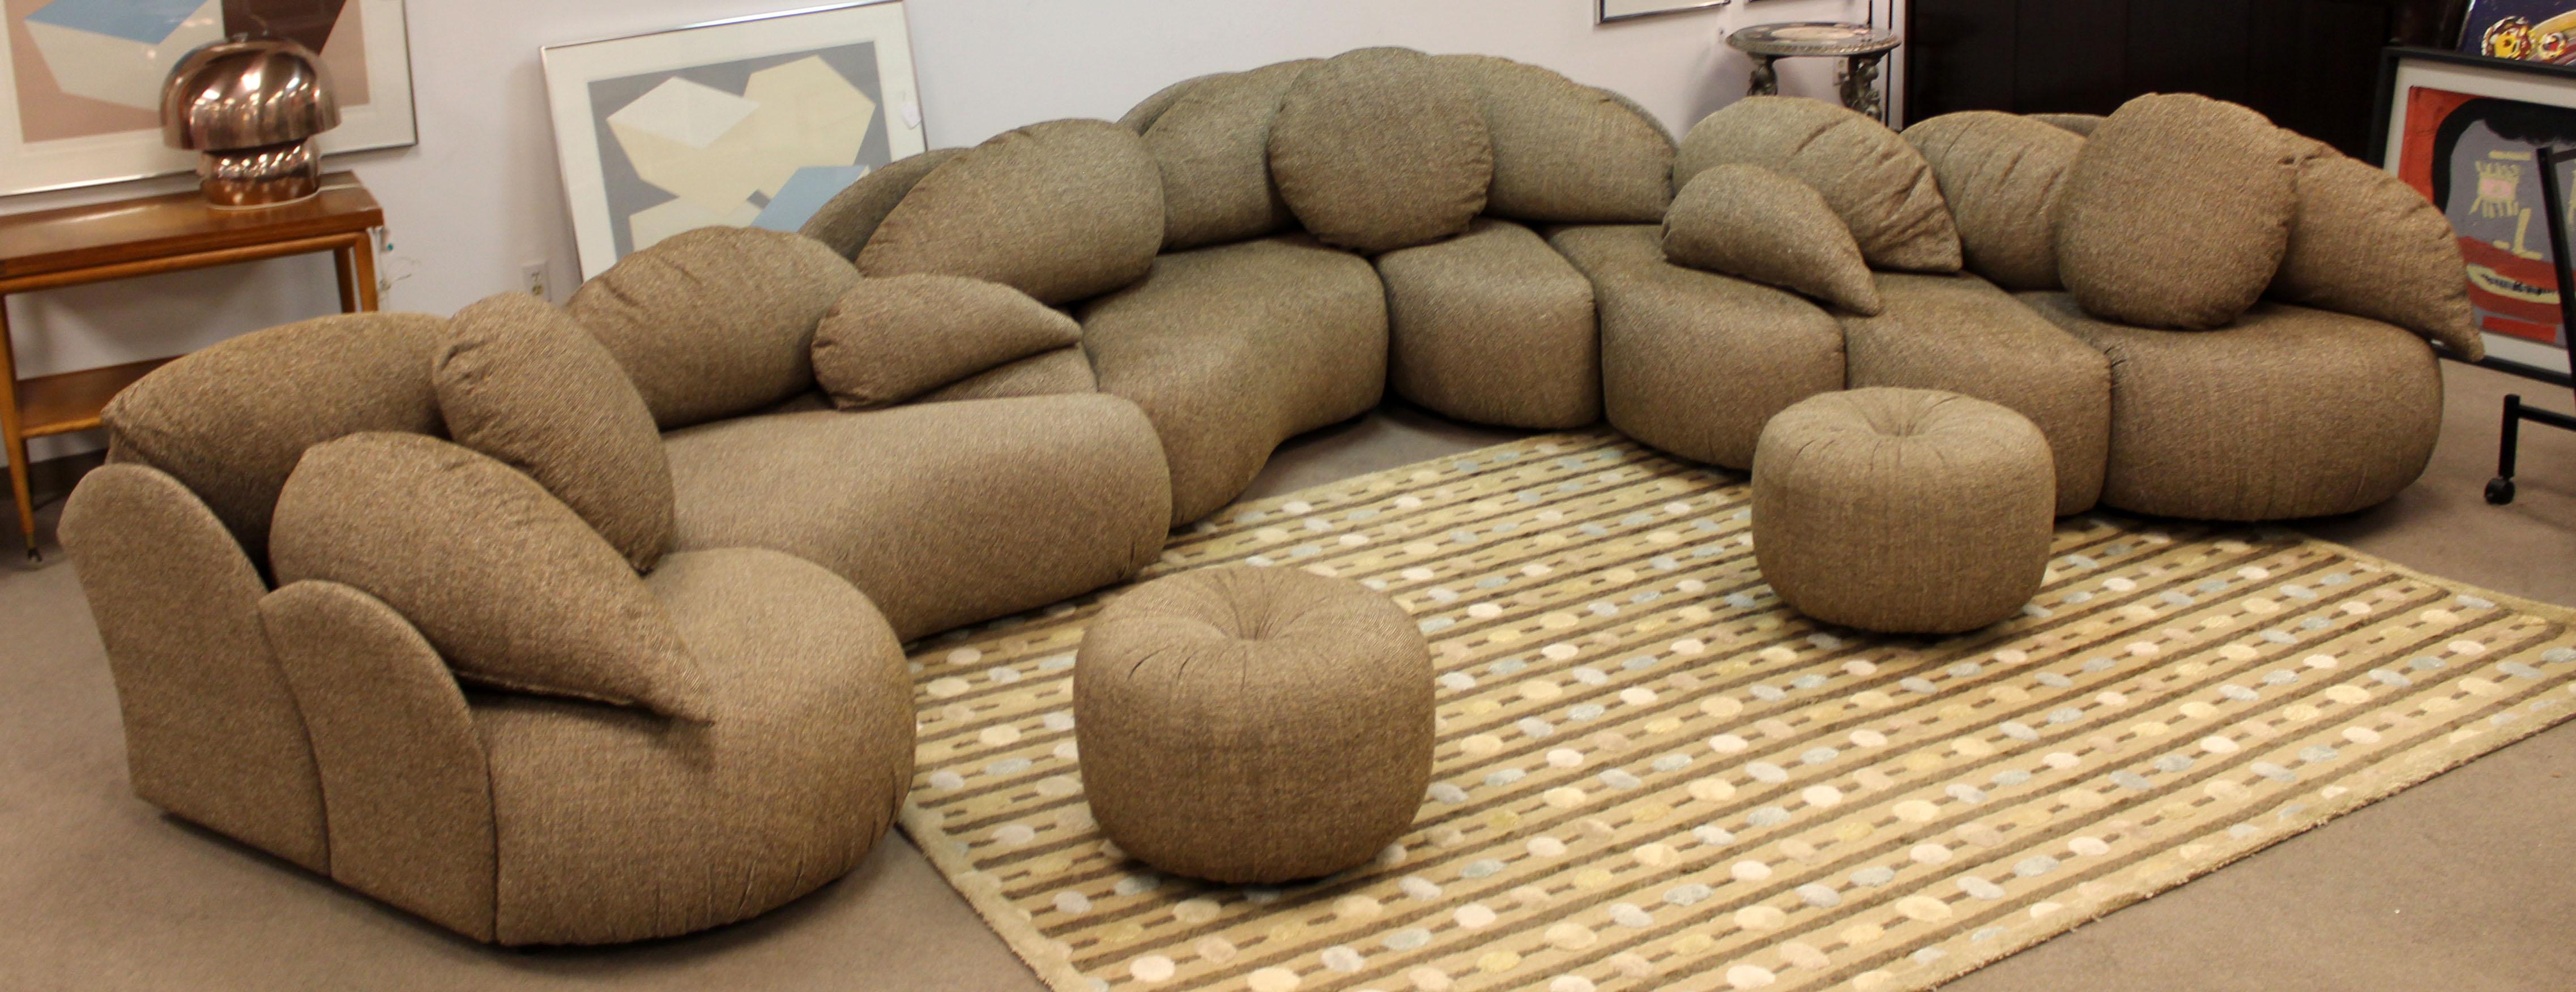 For your consideration is a wonderfully unique, large sectional sofa, with a sculptural design and two round ottomans, by Roche Bobois. Can be configured in any way to fit your needs. Extremely comfortable. Fabric and structure is in EXCELLENT